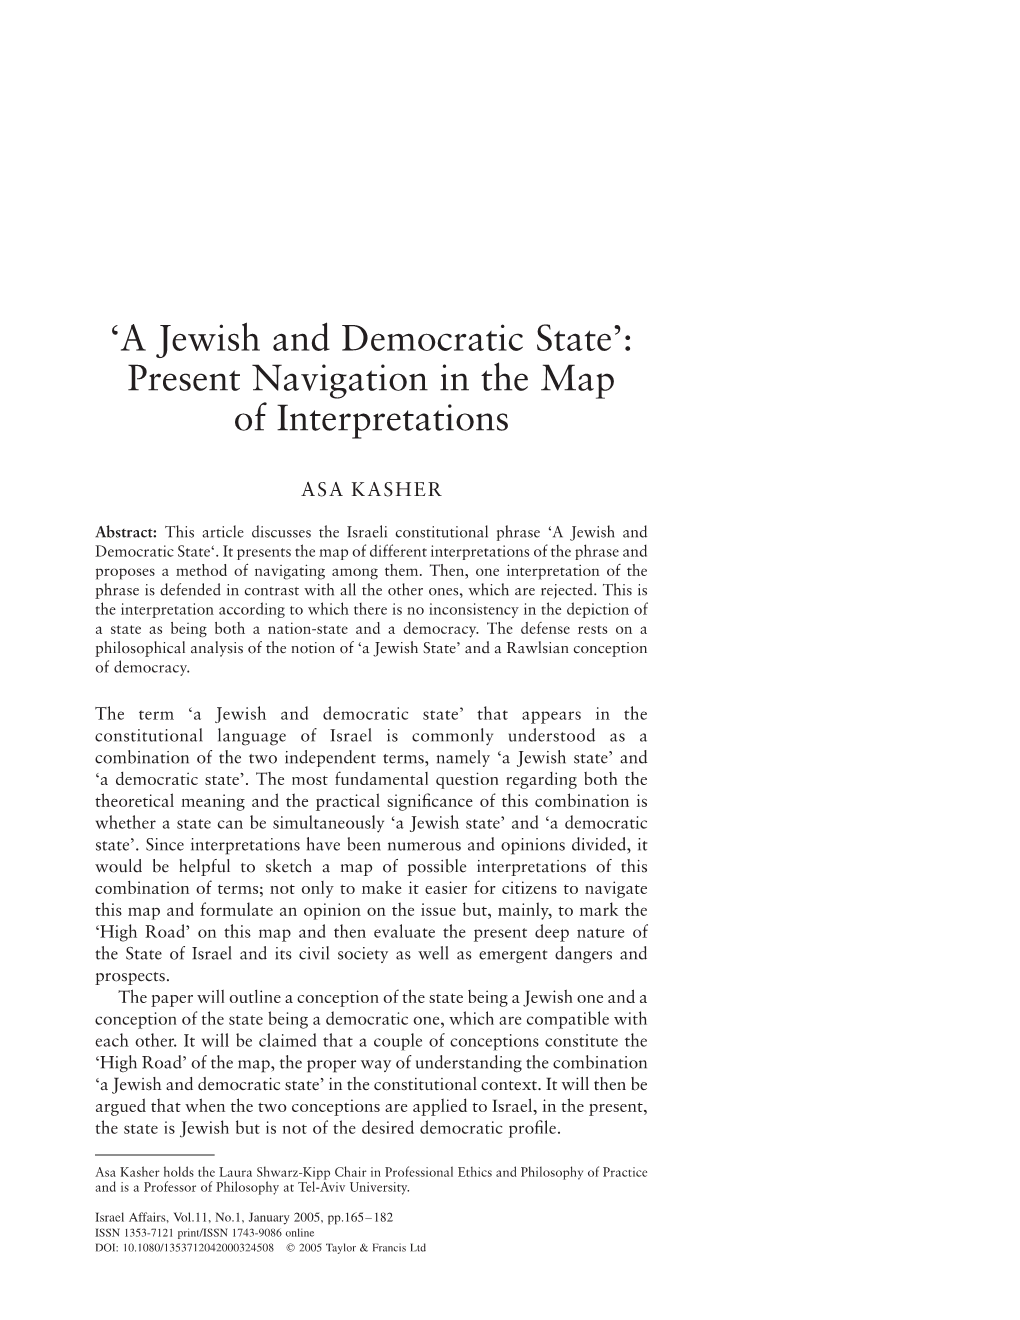 A Jewish and Democratic State’: Present Navigation in the Map of Interpretations